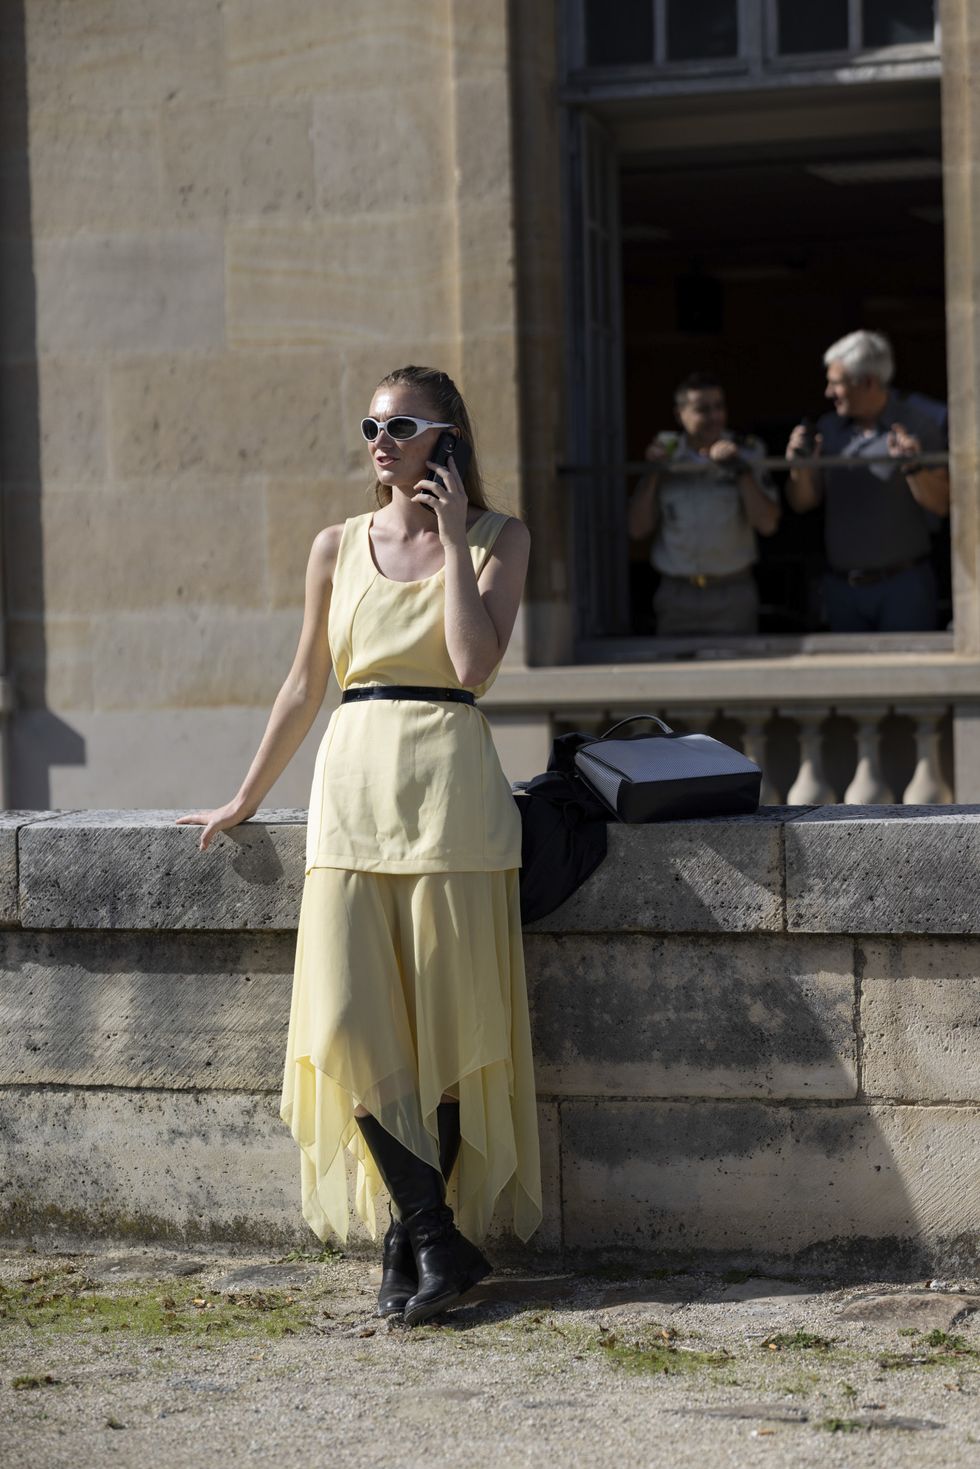 a person in a yellow dress talking on a cell phone